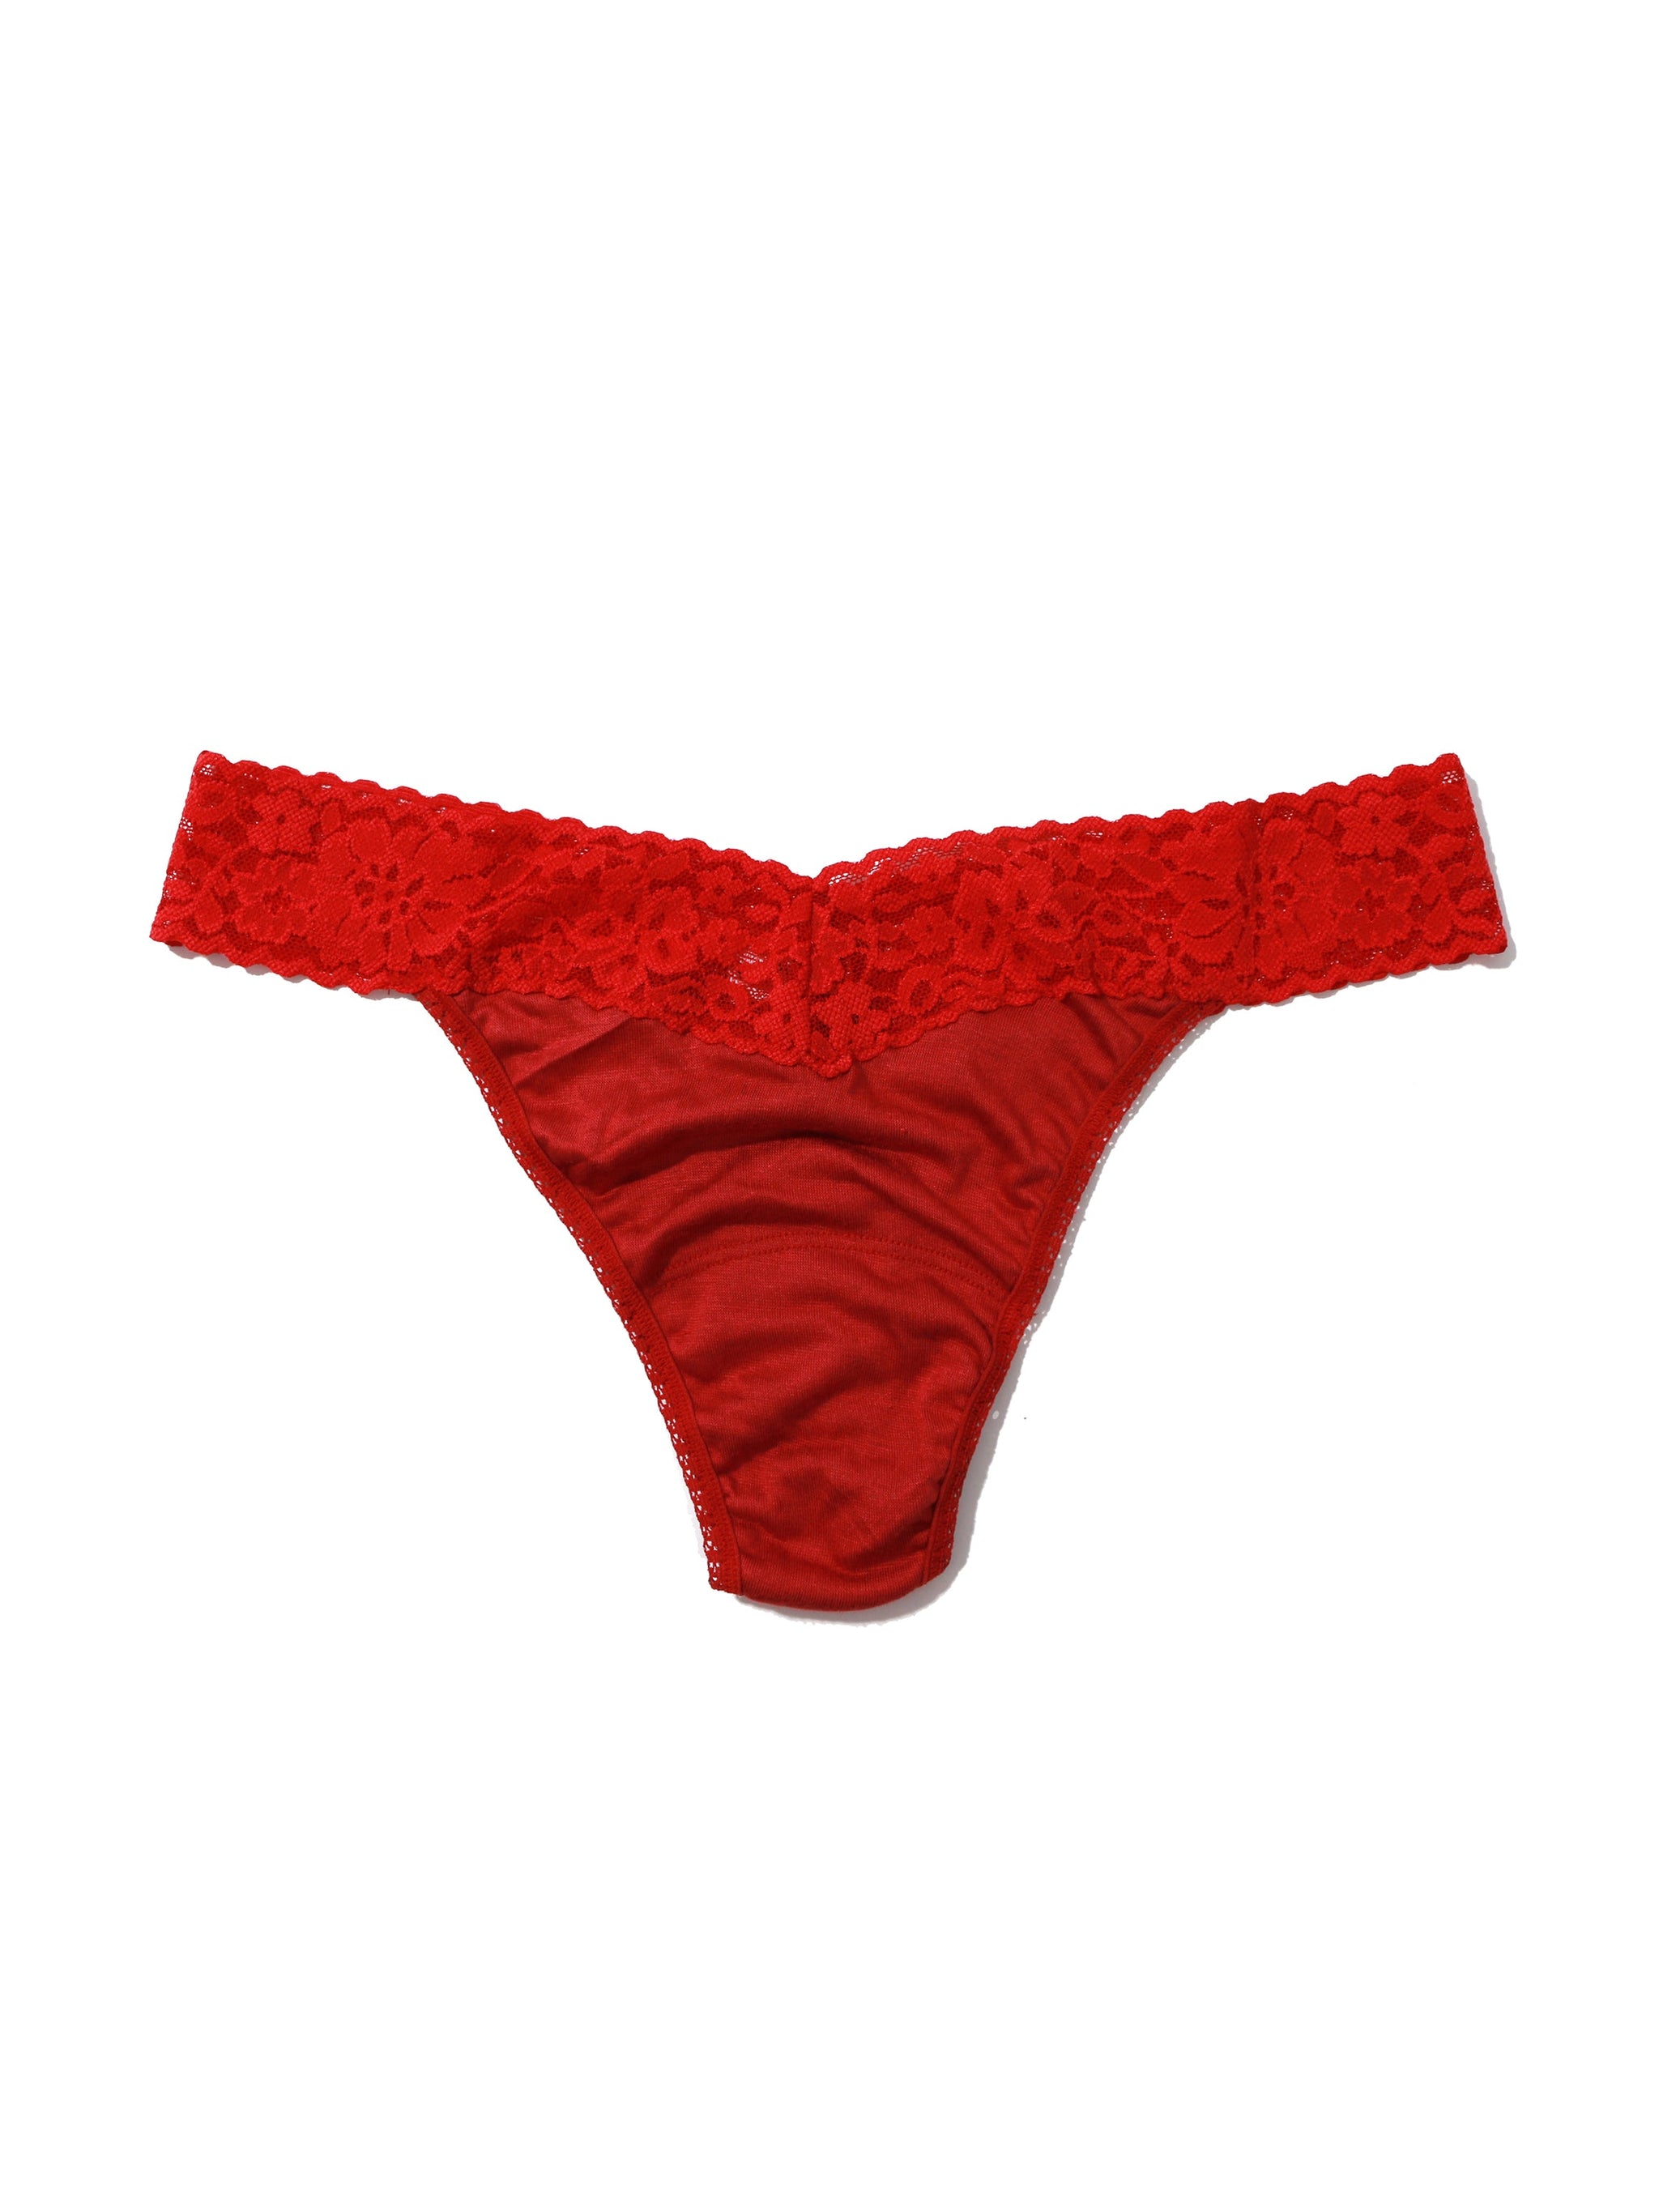 Eternal Bliss Lace Low Rise Thong Panty - Red Berry